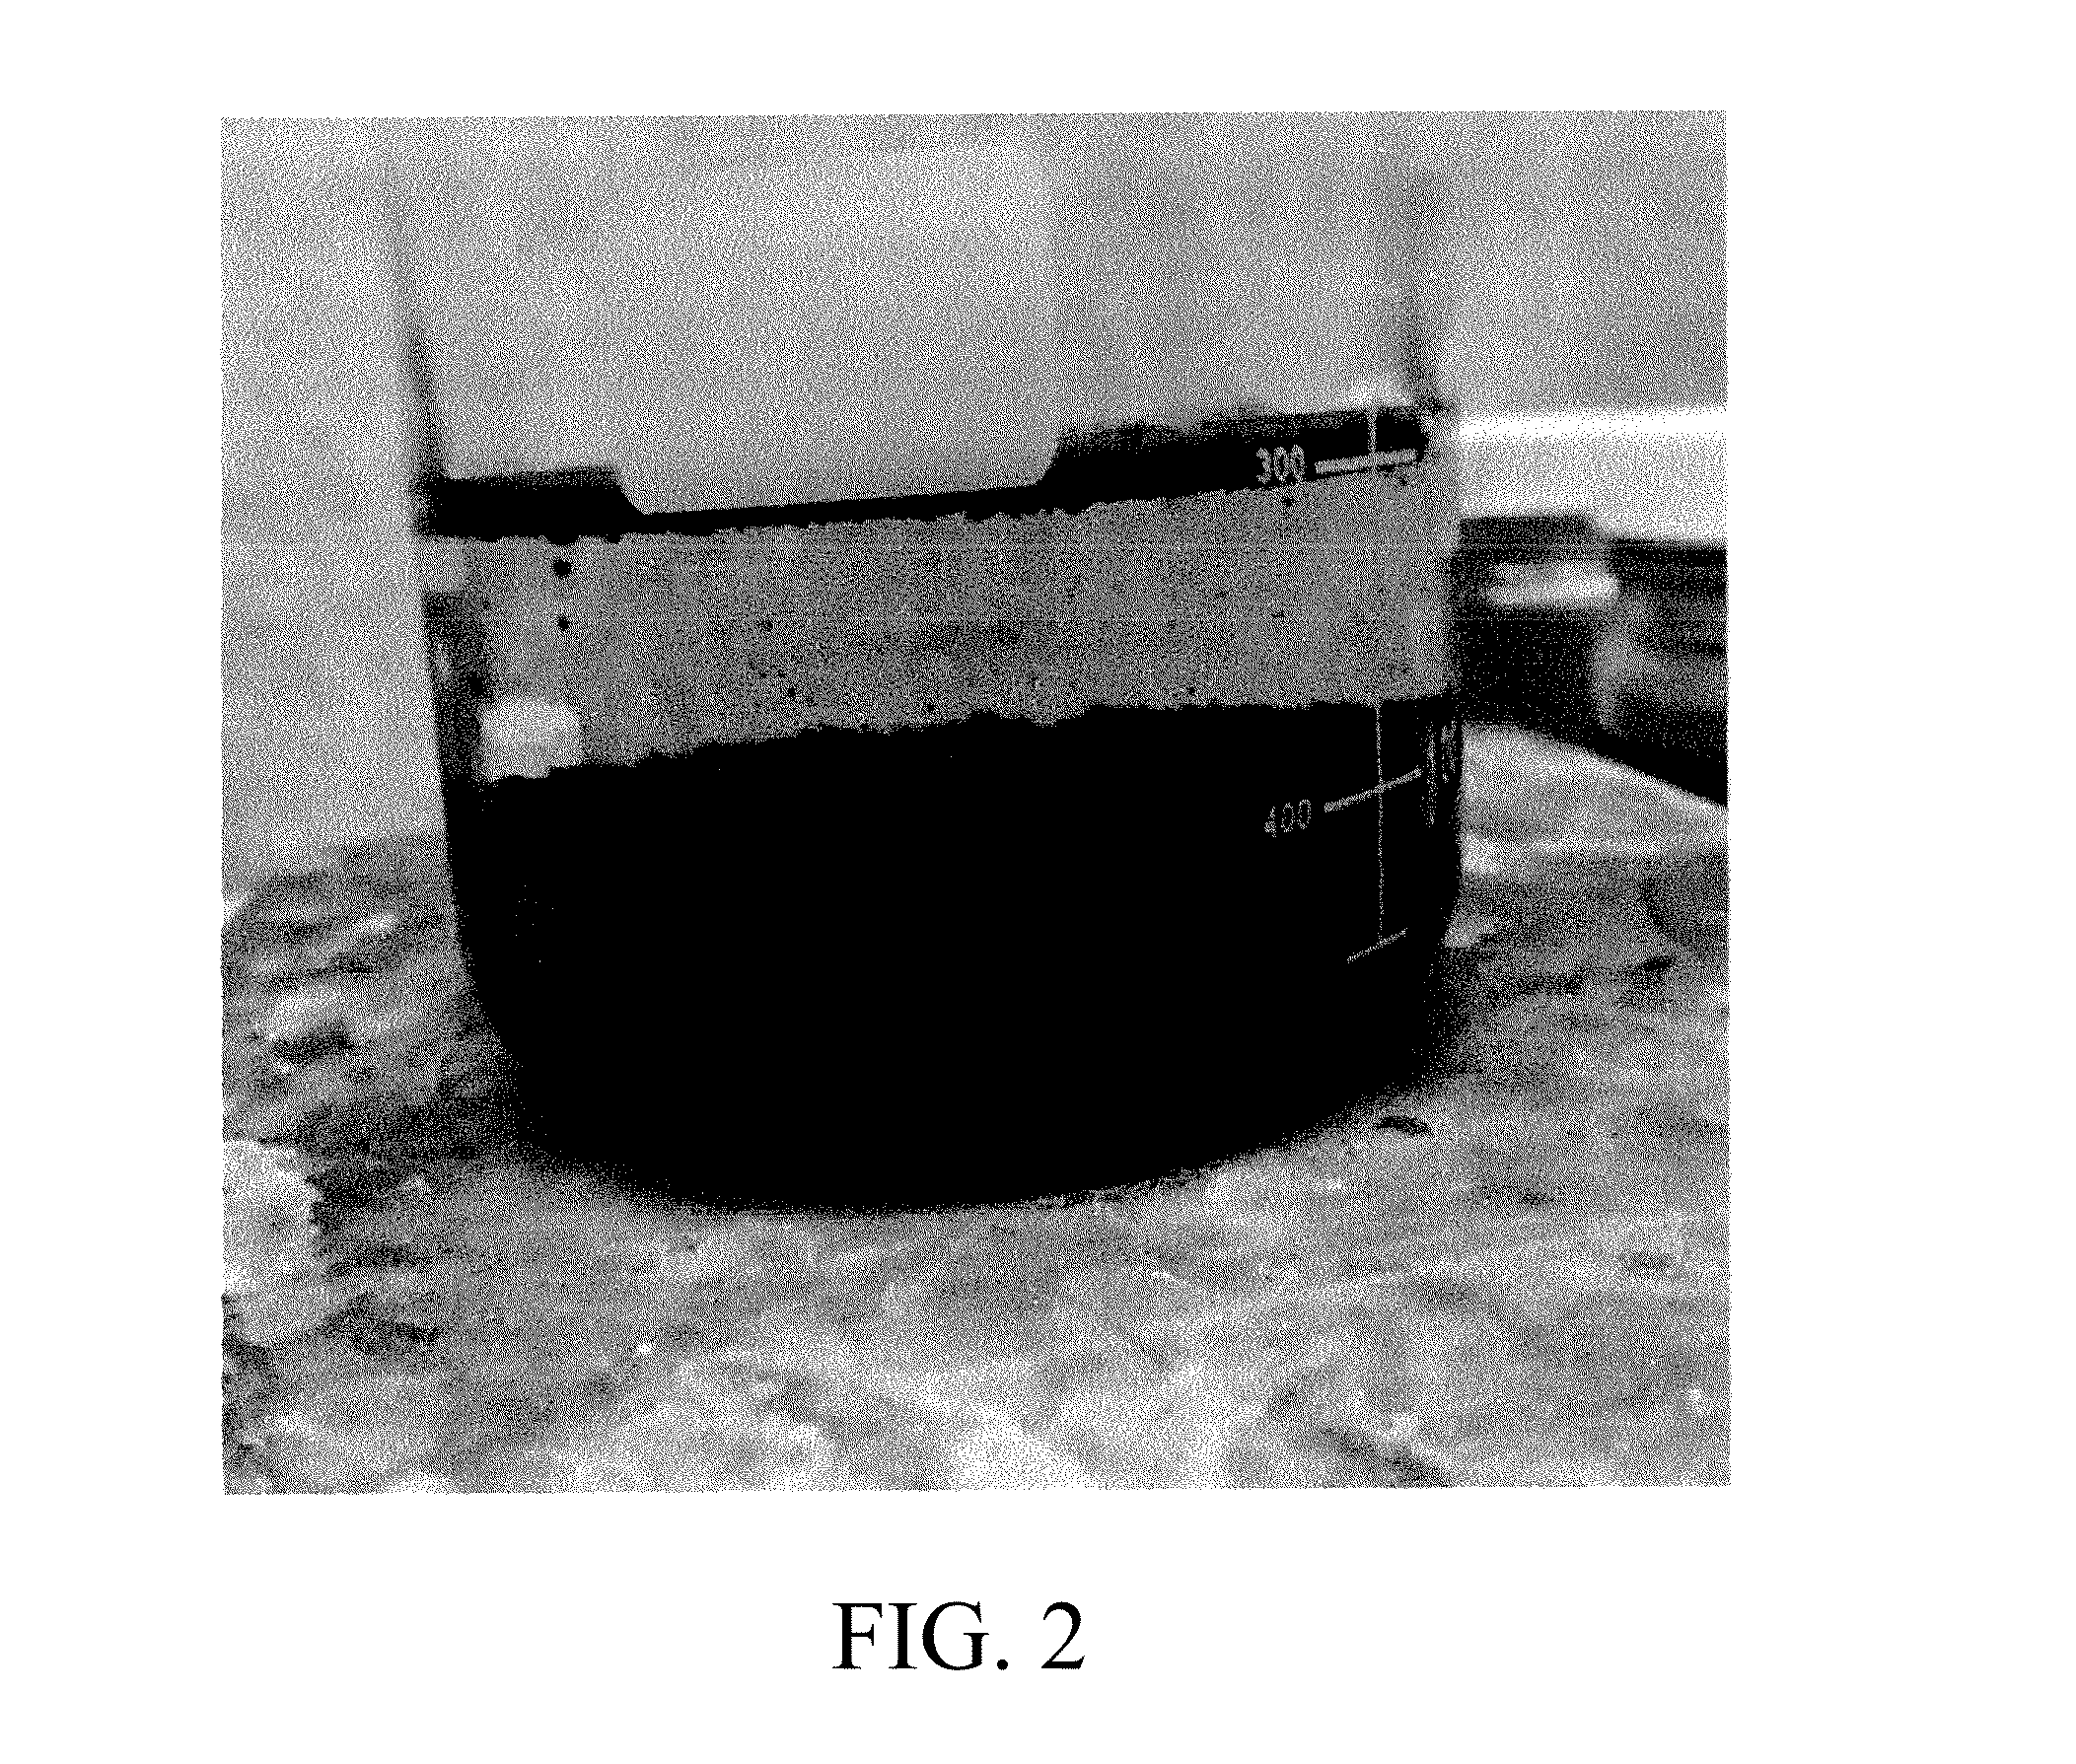 Formulations and methods for removing heavy metals from waste solutions containing chelating agents